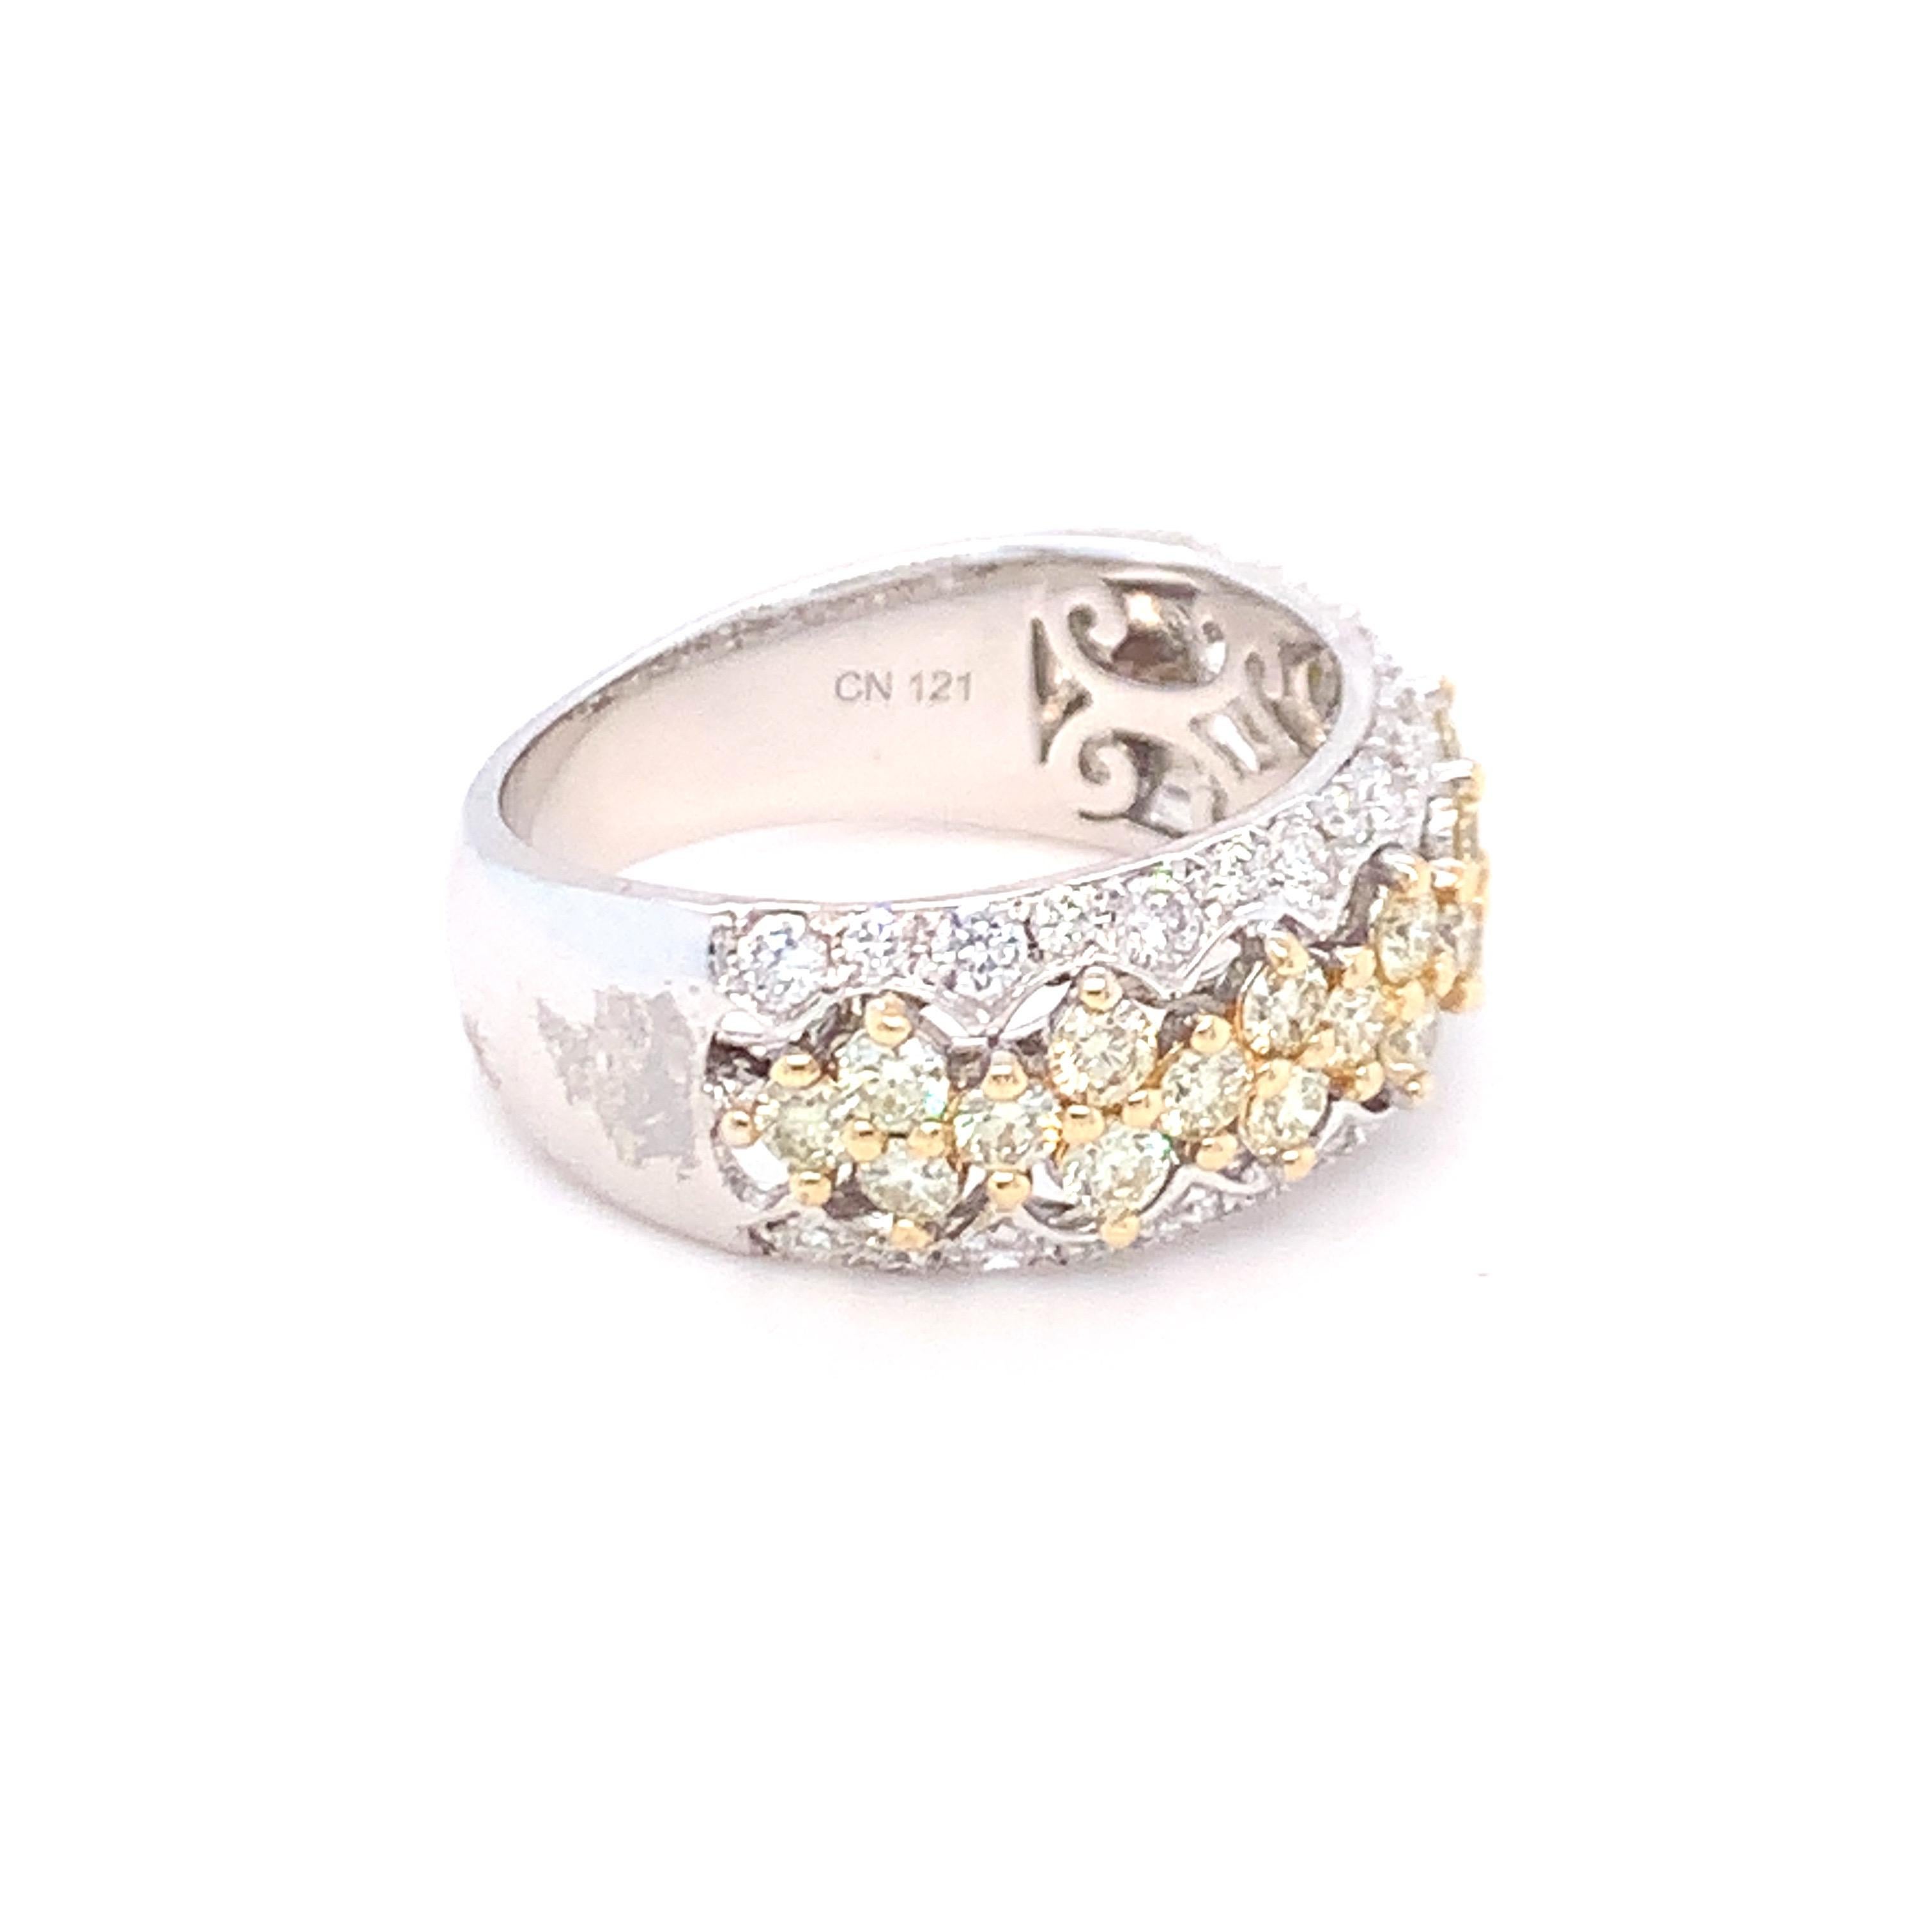 1.45 Carat Yellow & White Diamond Band Ring in 14K White Gold For Sale 8